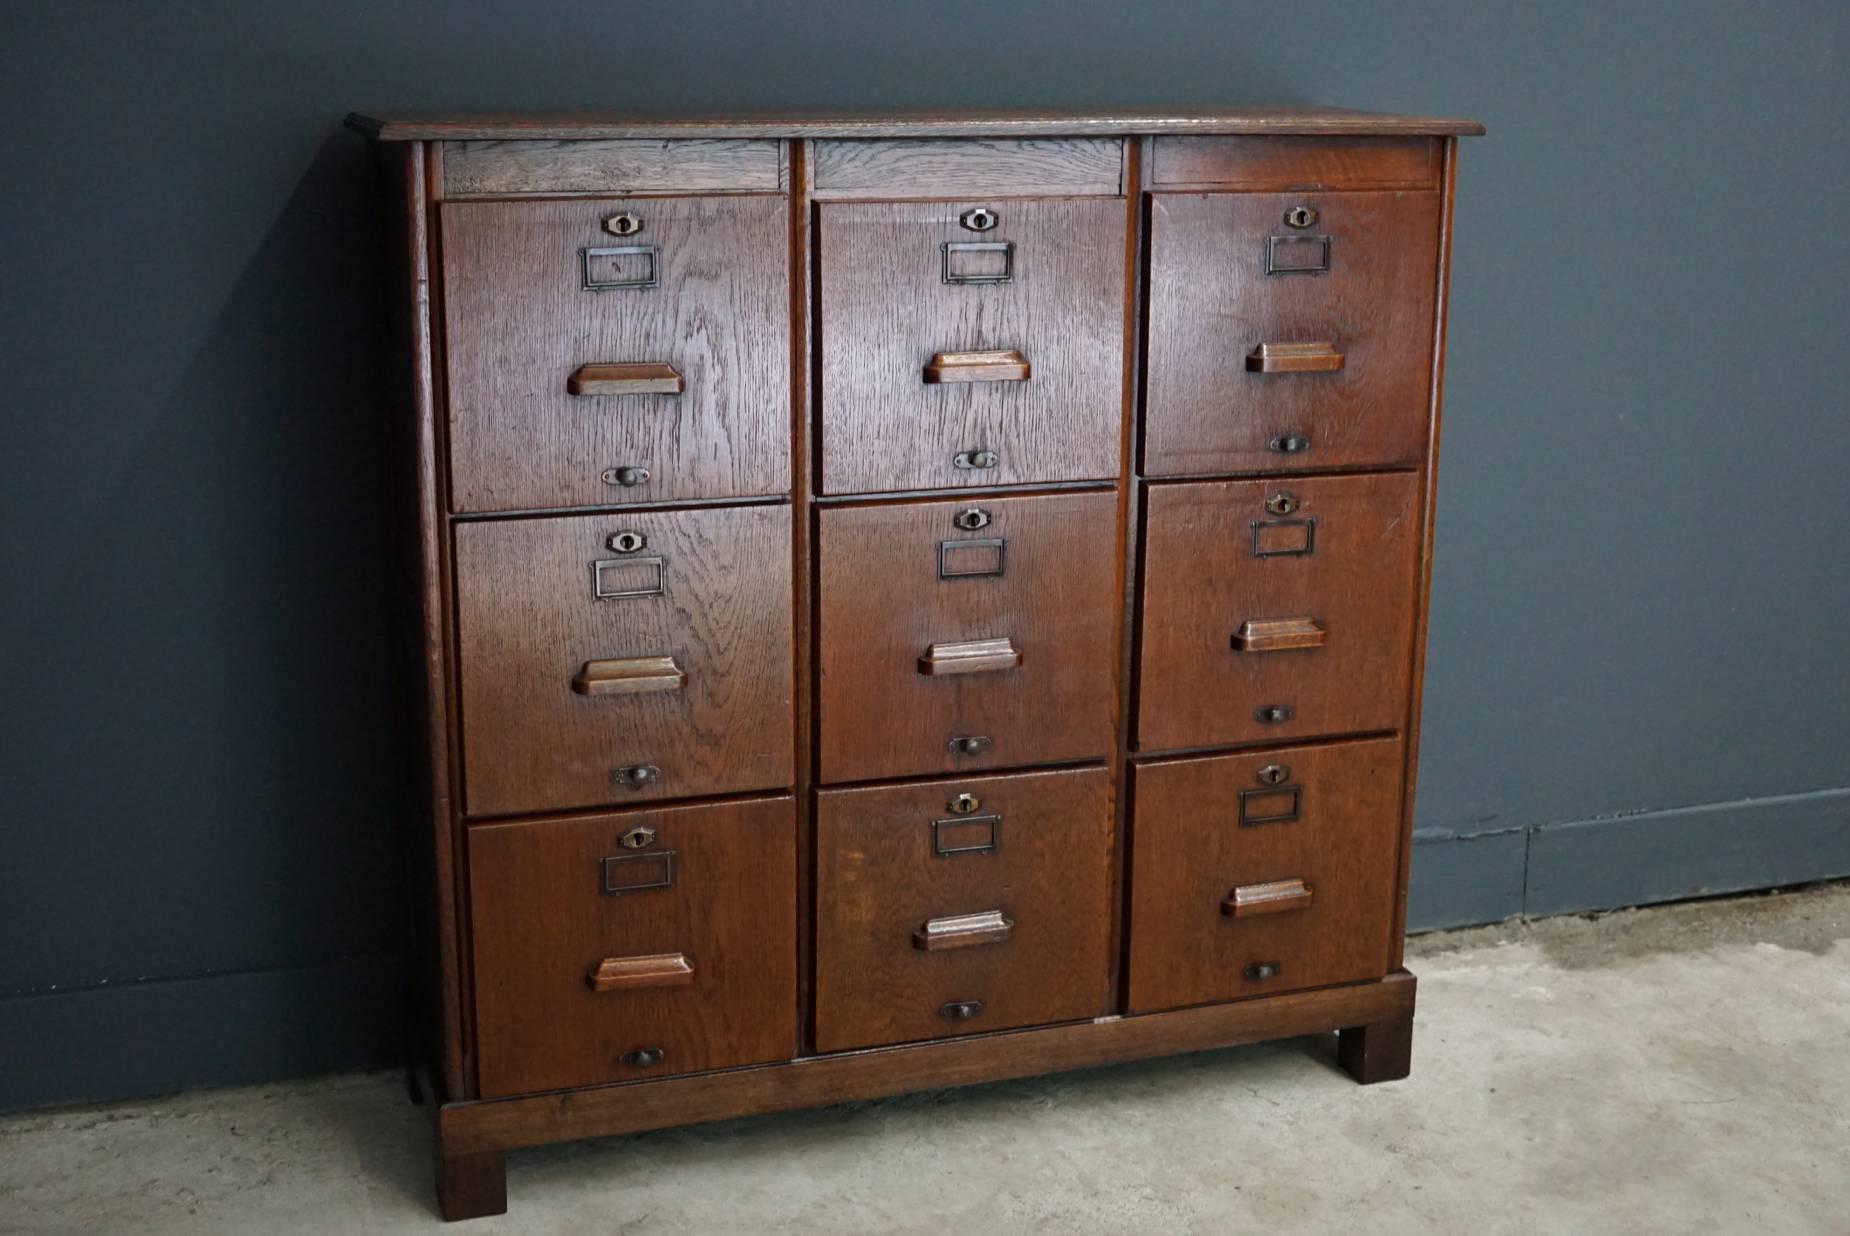 This filing cabinet was designed, circa 1930s in England. The cabinet is made from oak and features nine drawers with metal hardware and wooden handles.